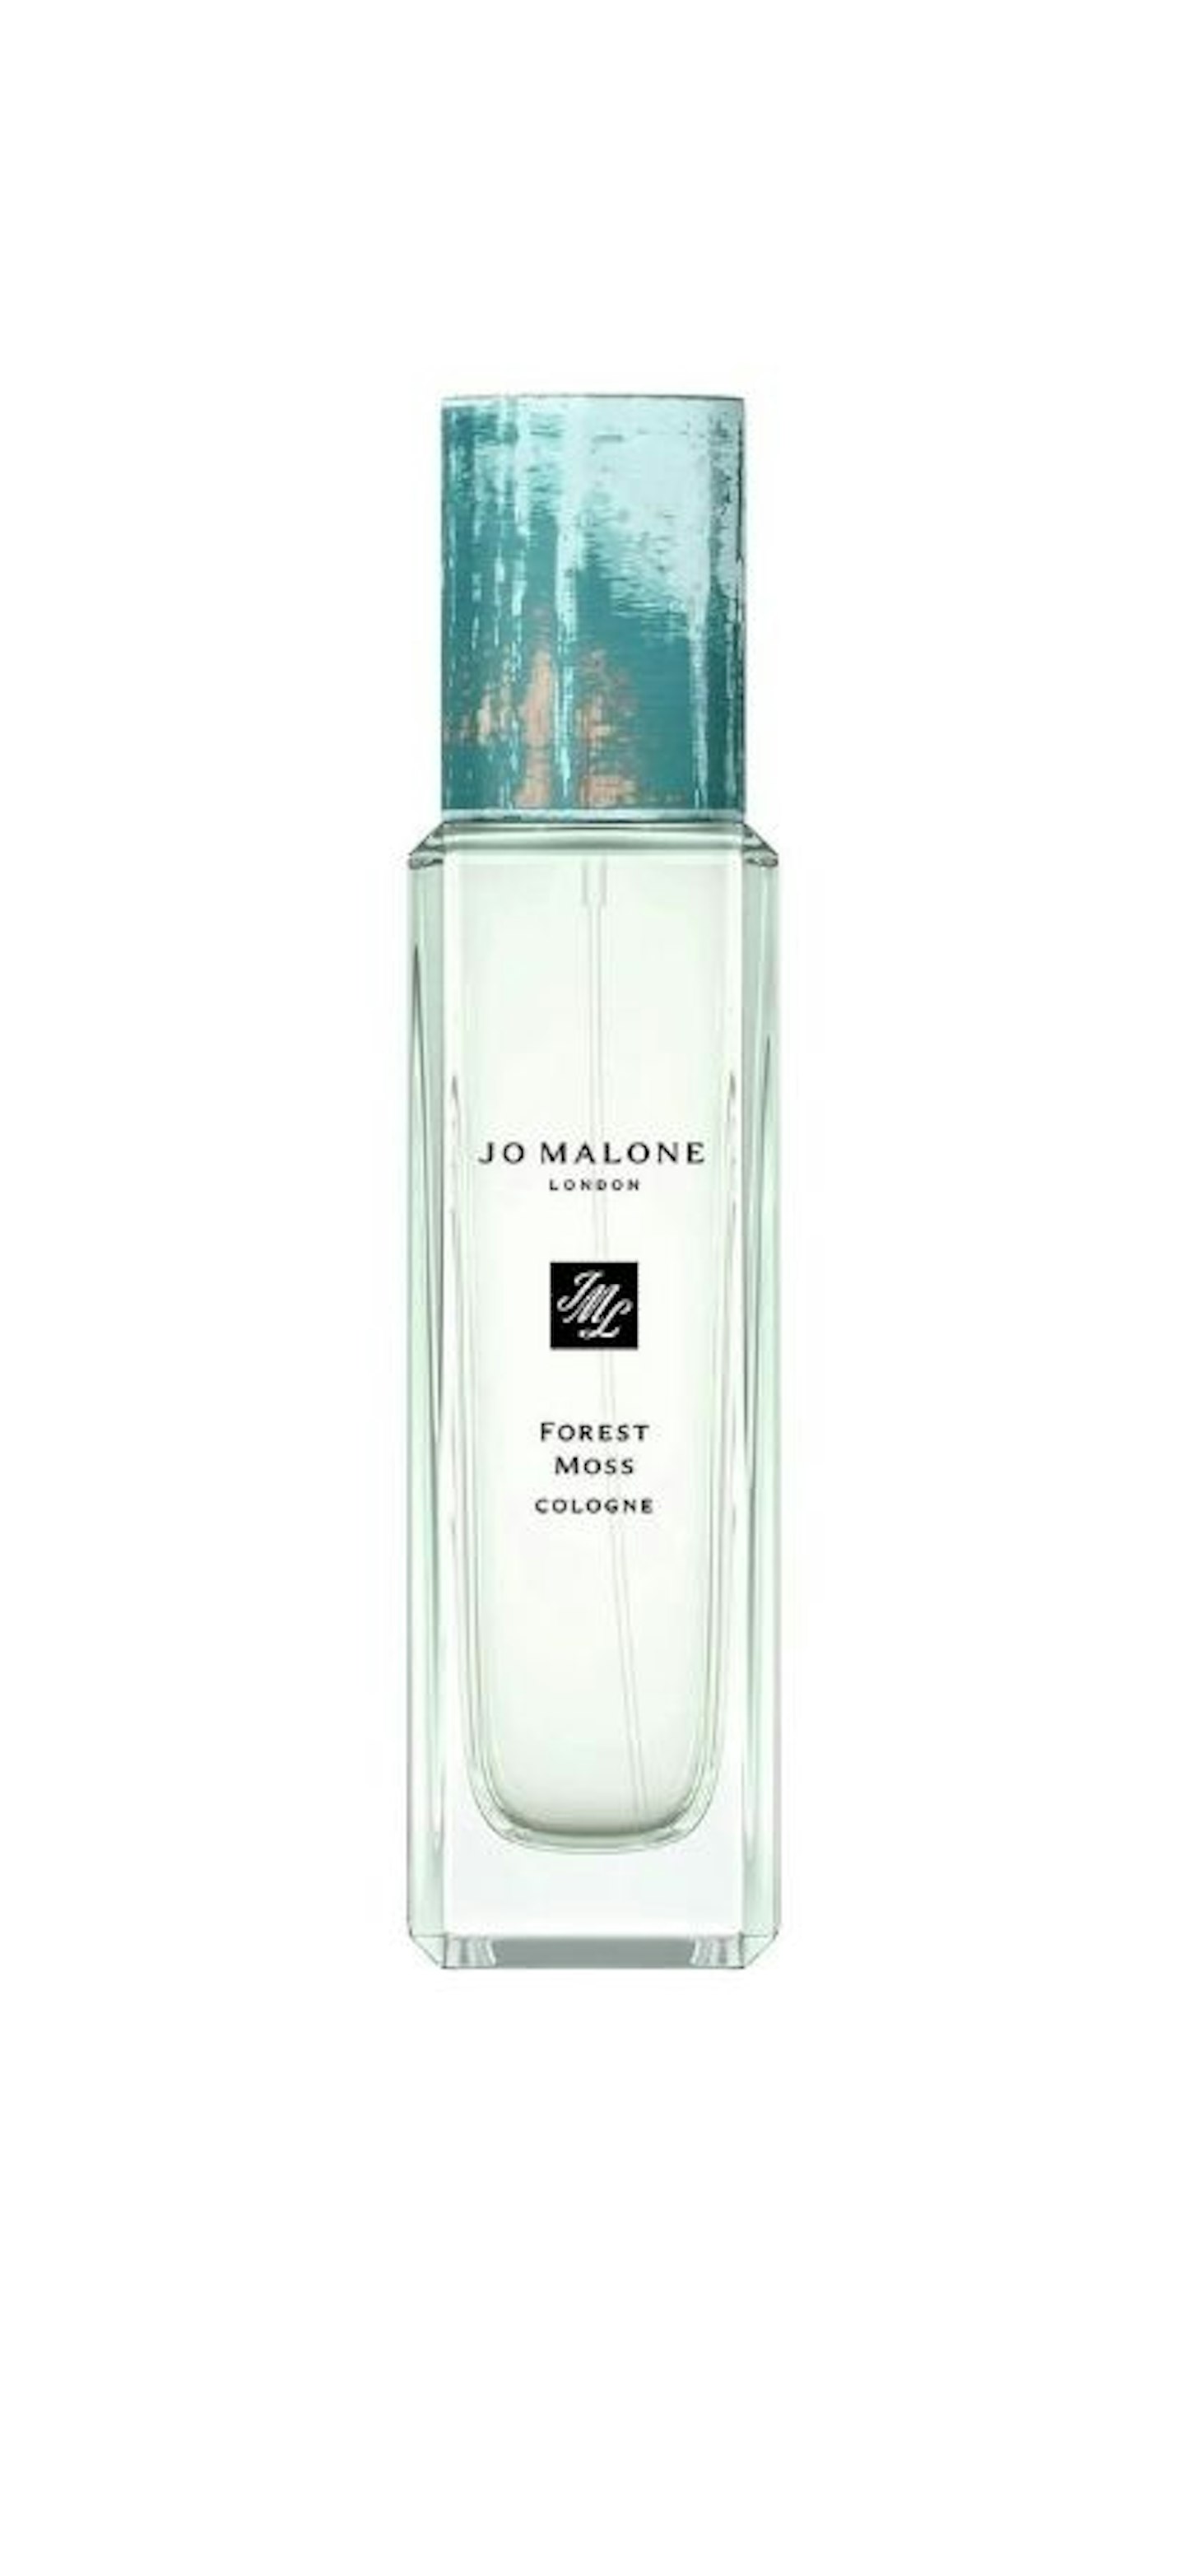 Jo Malone London Forest Moss Cologne